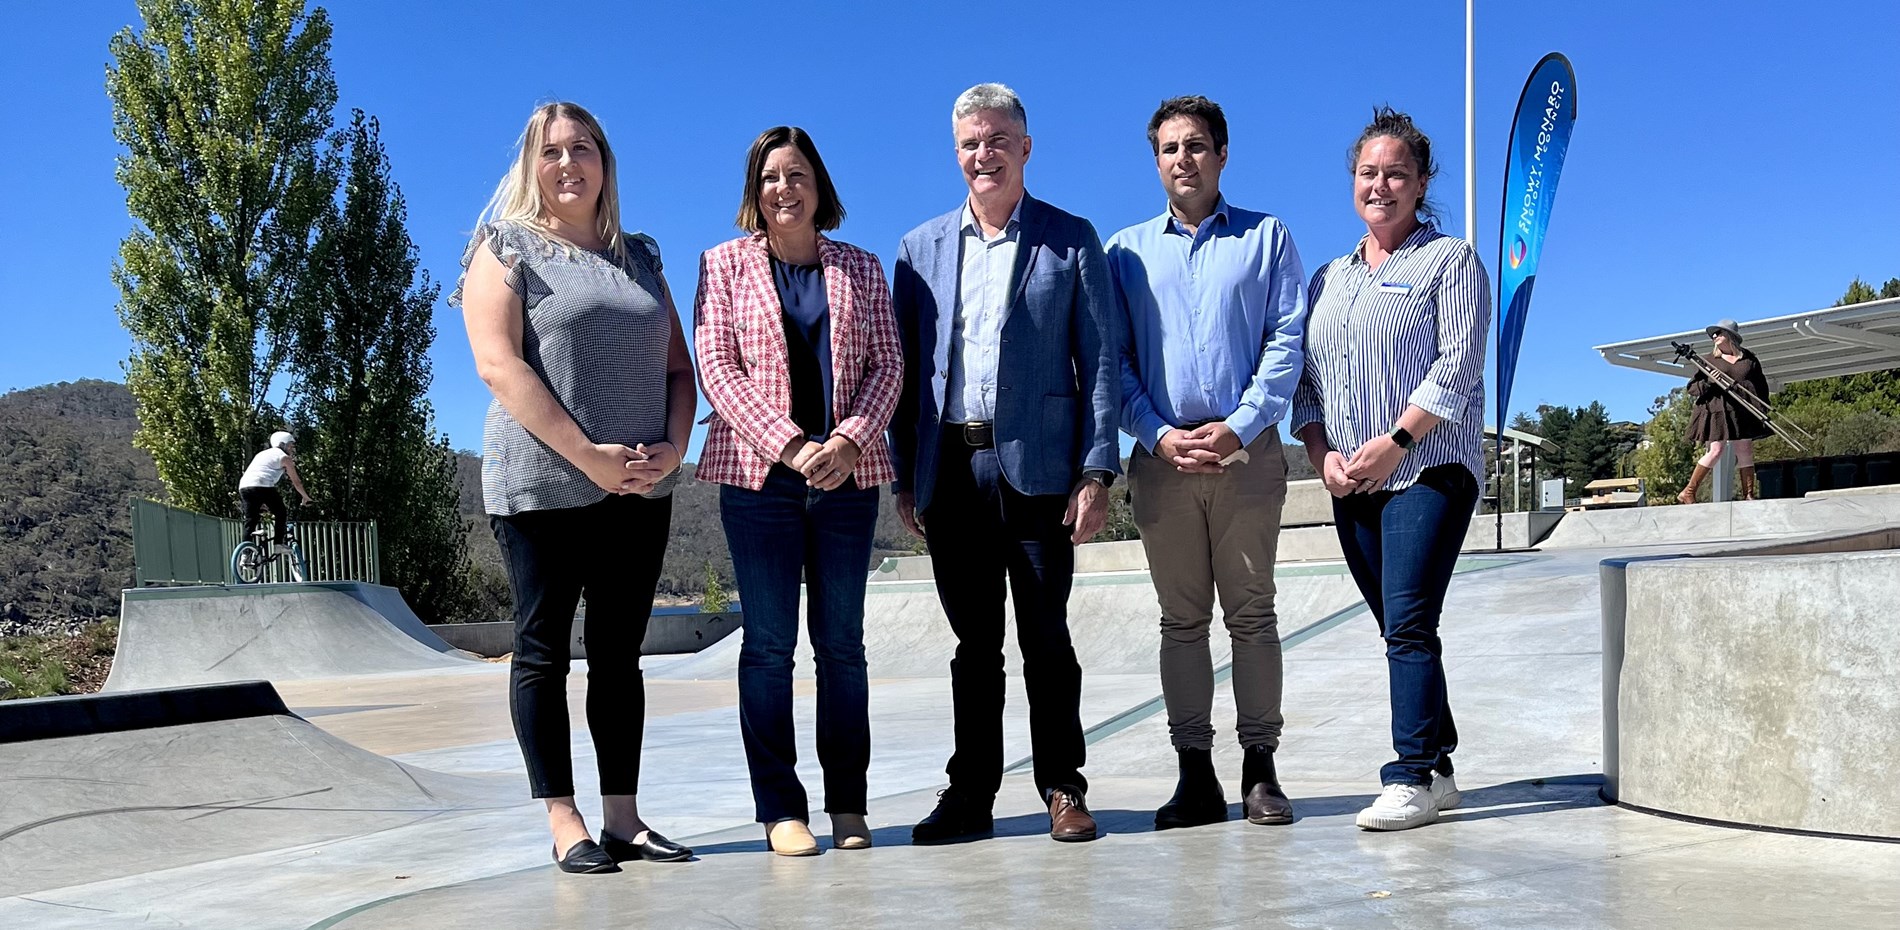 NEW JINDABYNE SKATE PARK OPEN AND READY FOR THE COMMUNITY TO ‘DROP-IN’ Main Image